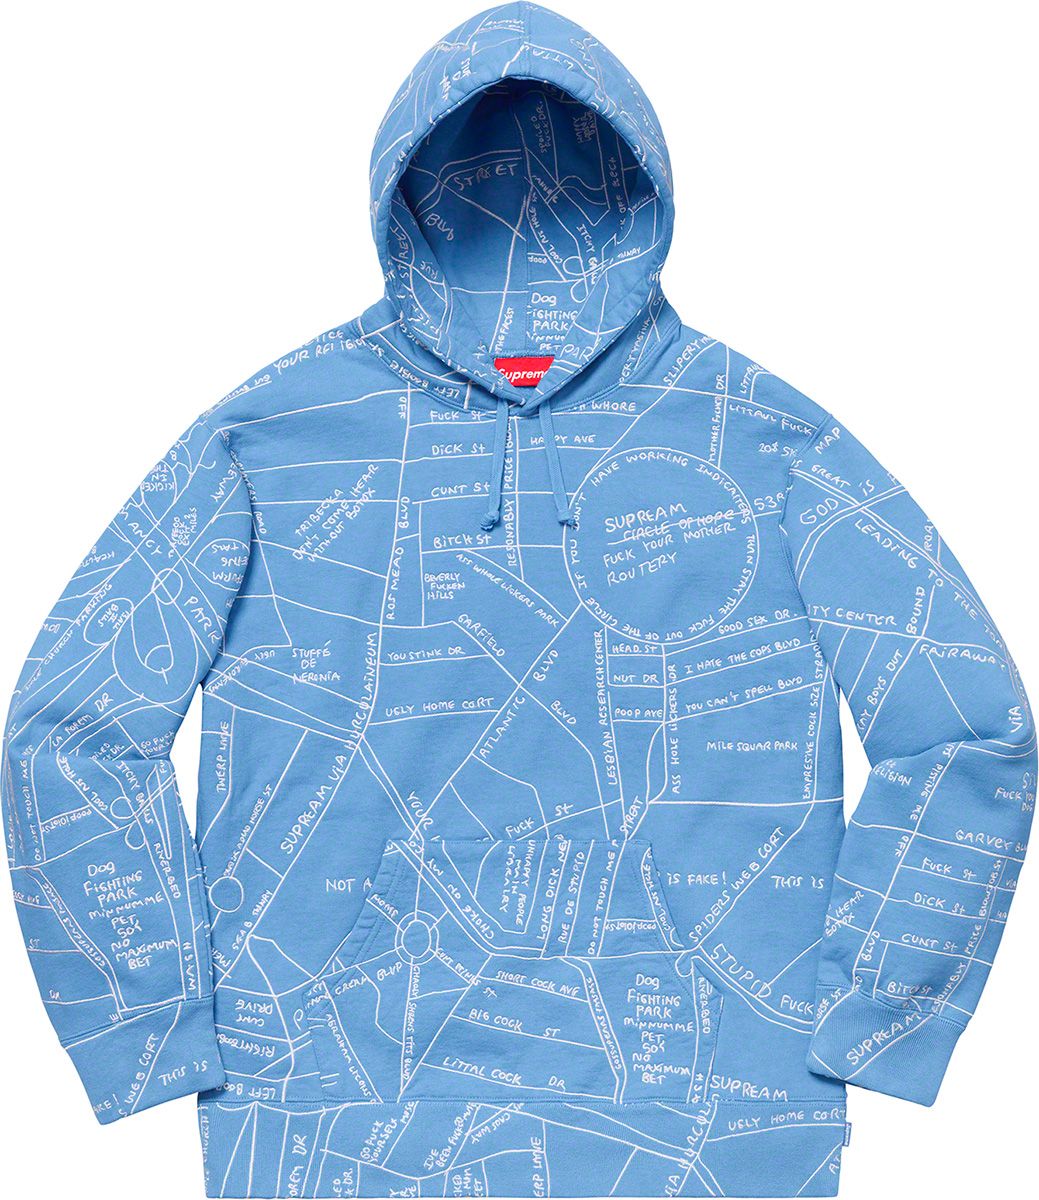 Gonz Embroidered Map Hooded Sweatshirt - Spring/Summer 2019